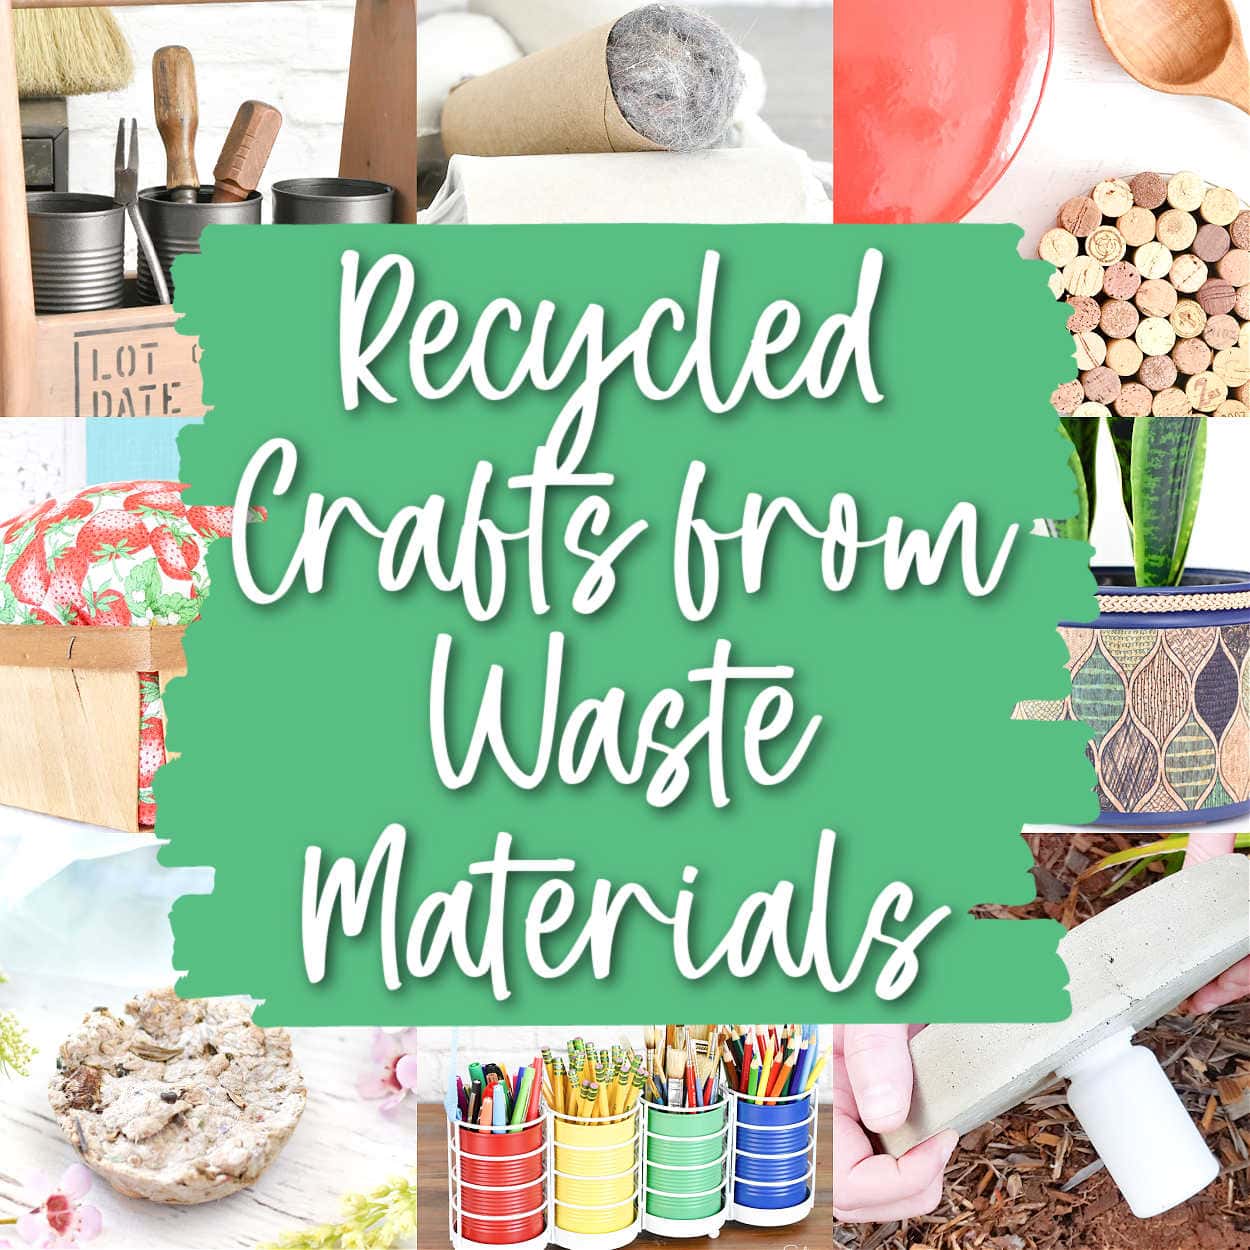 50 Fun Earth Day Crafts and Activities Using Upcycled Materials